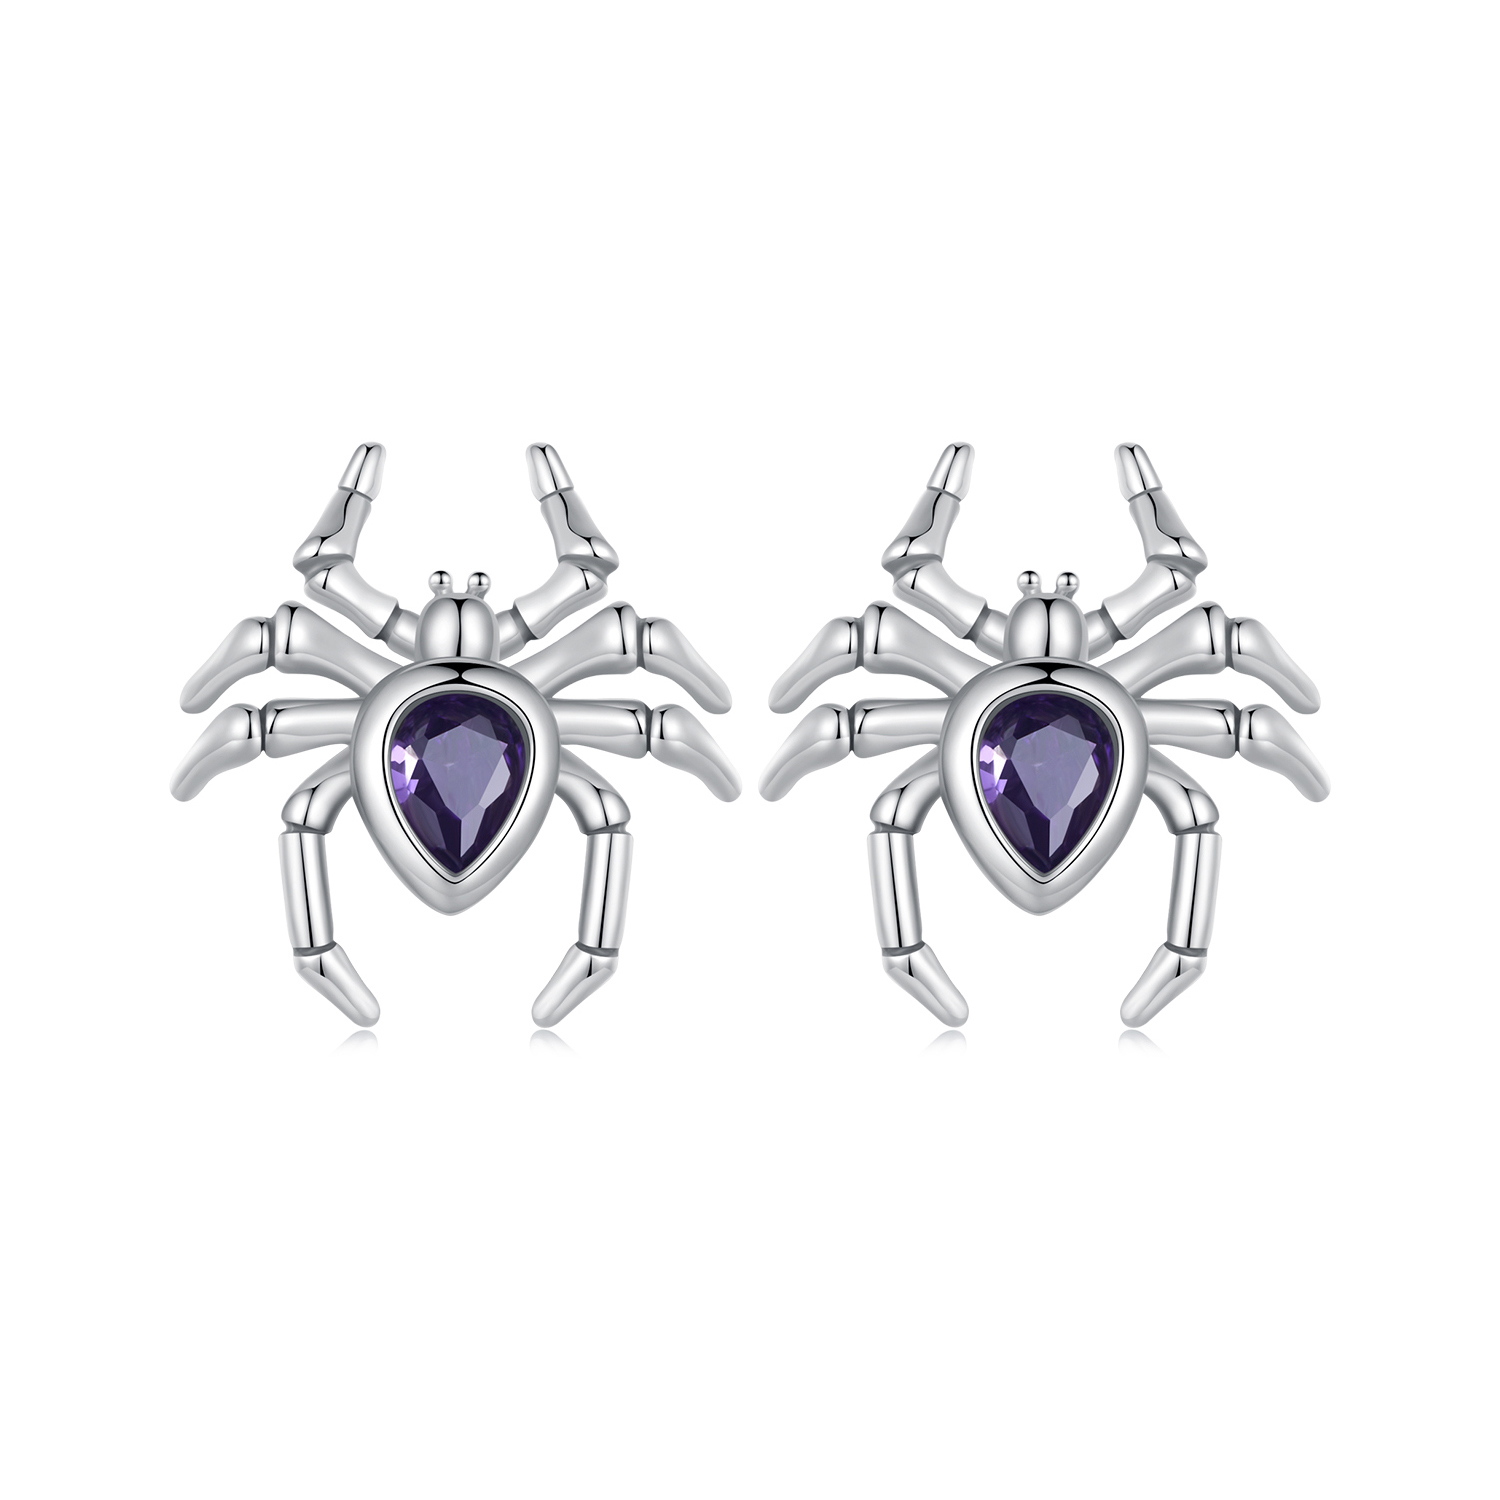 pandora style spider studs earrings bse891